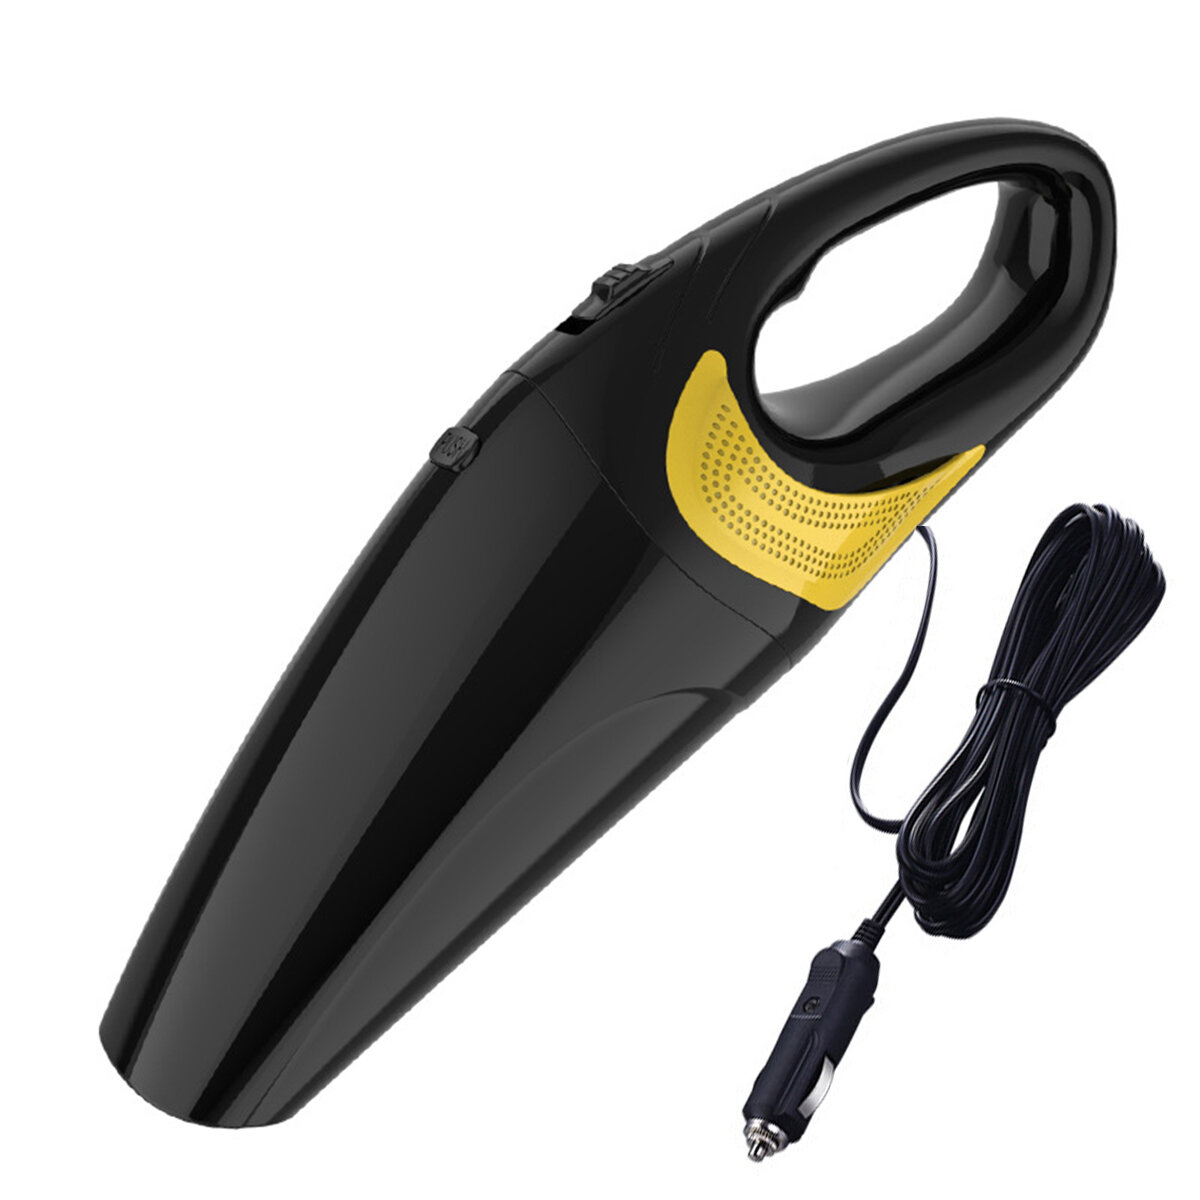 120W Handheld Vacuum Cleaner Wet Dry Dual Use 2000rpm Powerful Suction Lightweight for Home Car Pet